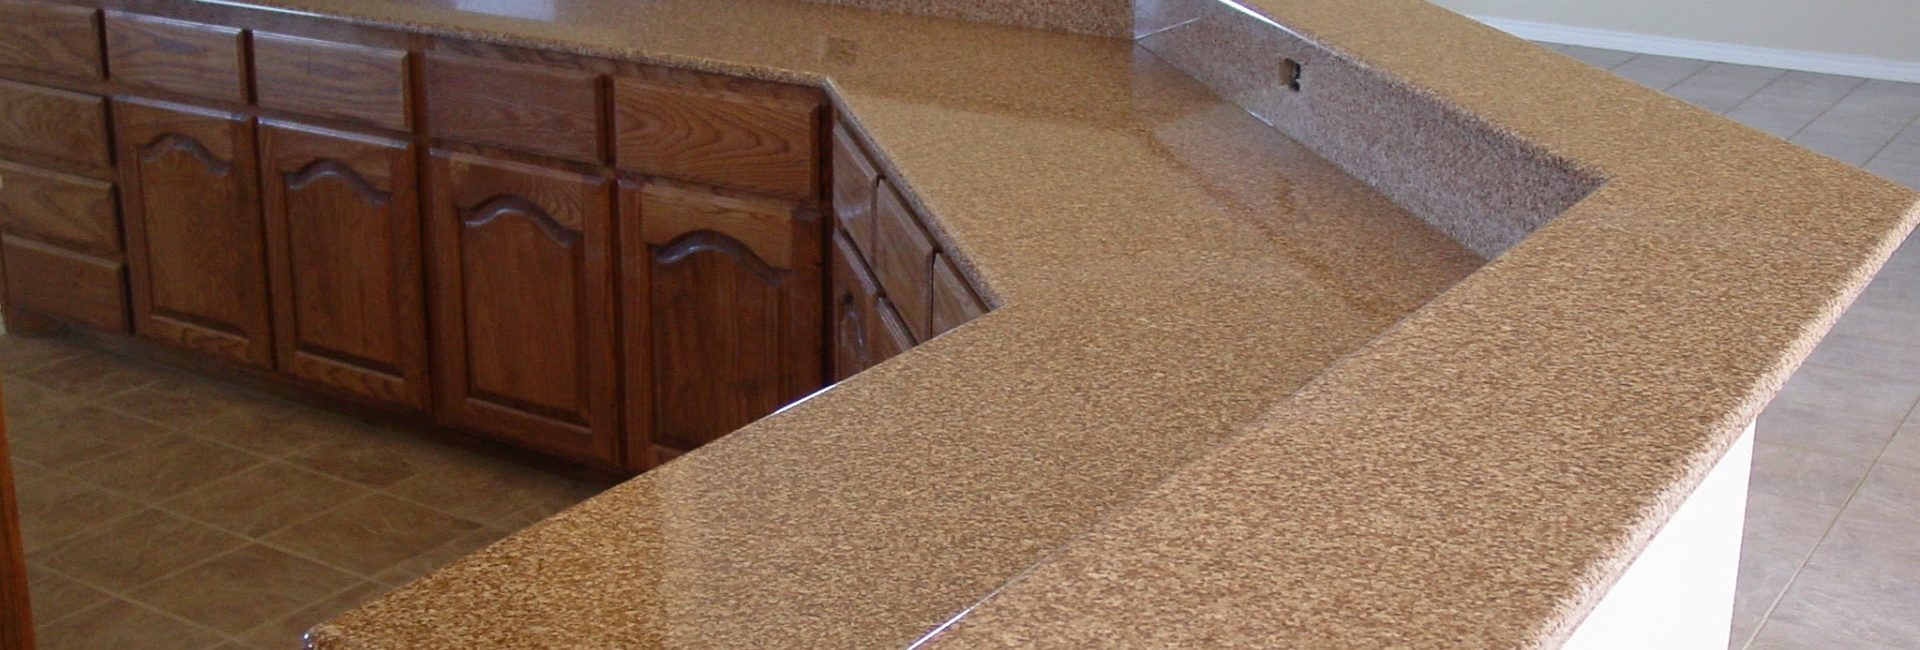 Cabinets and Countertops of Texas 4